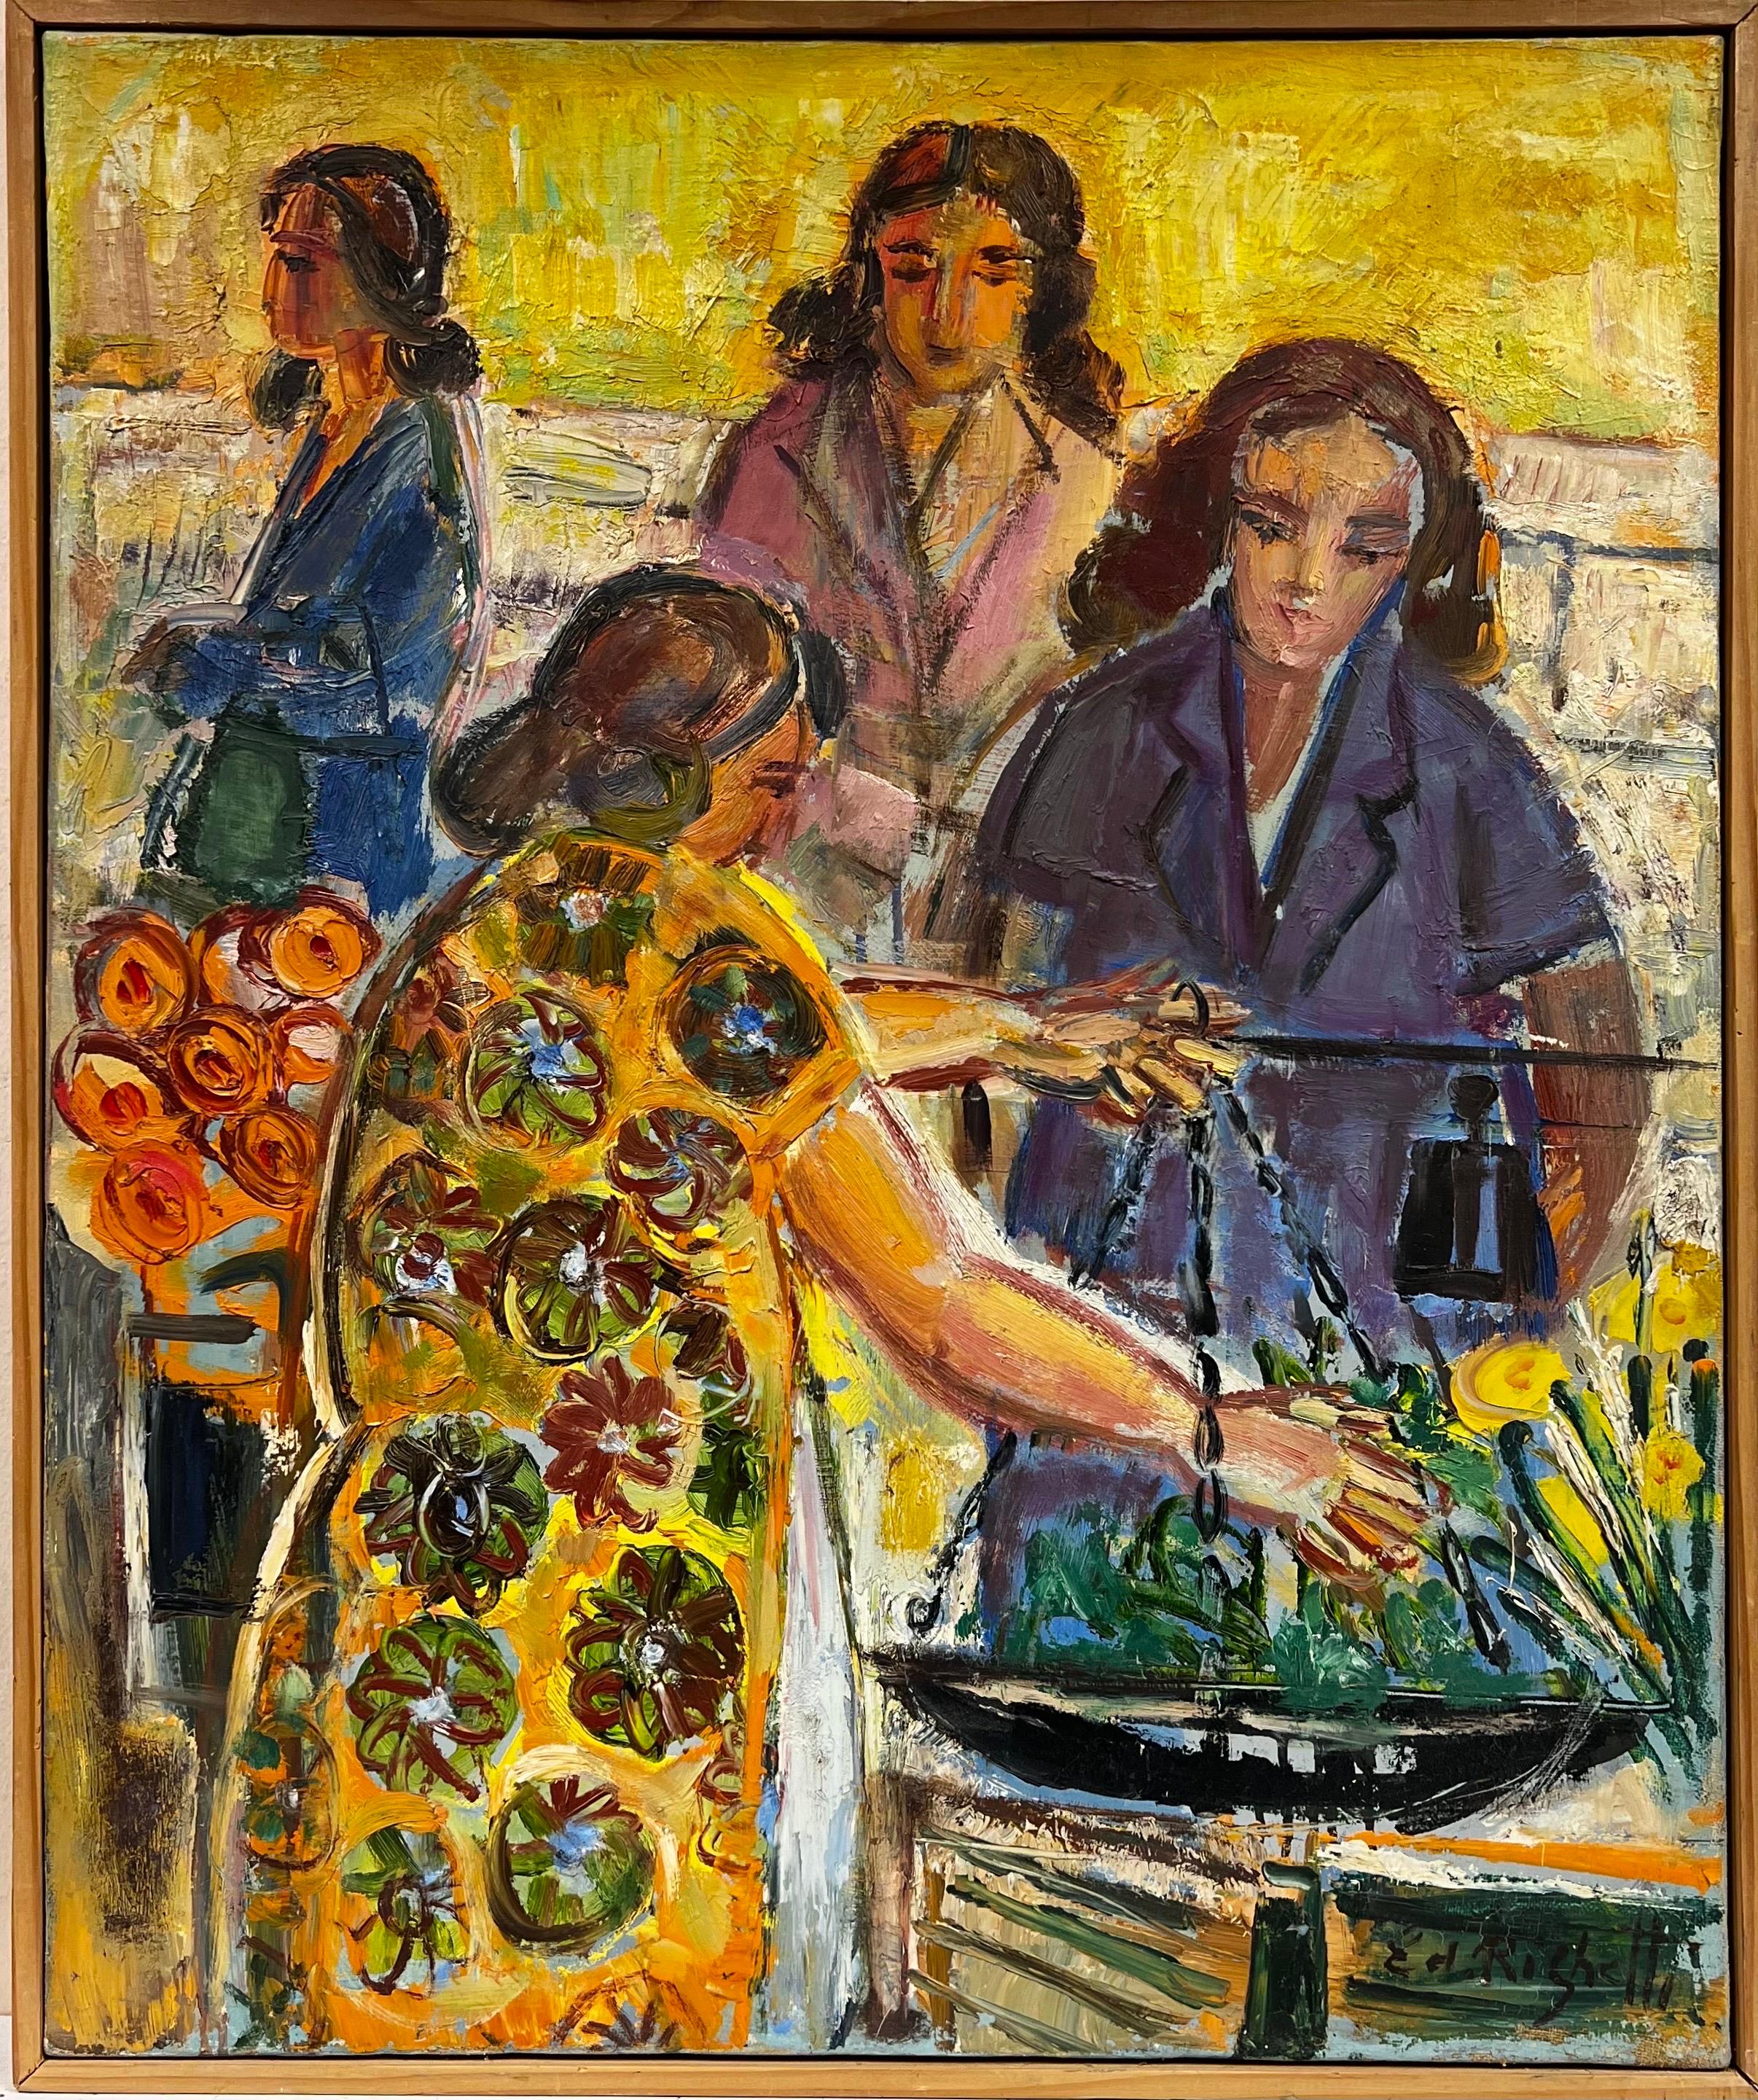 Menton South of France Ladies at Flower Market Stall 1960's French Oil - Painting by Édouard Righetti (1924-2001)